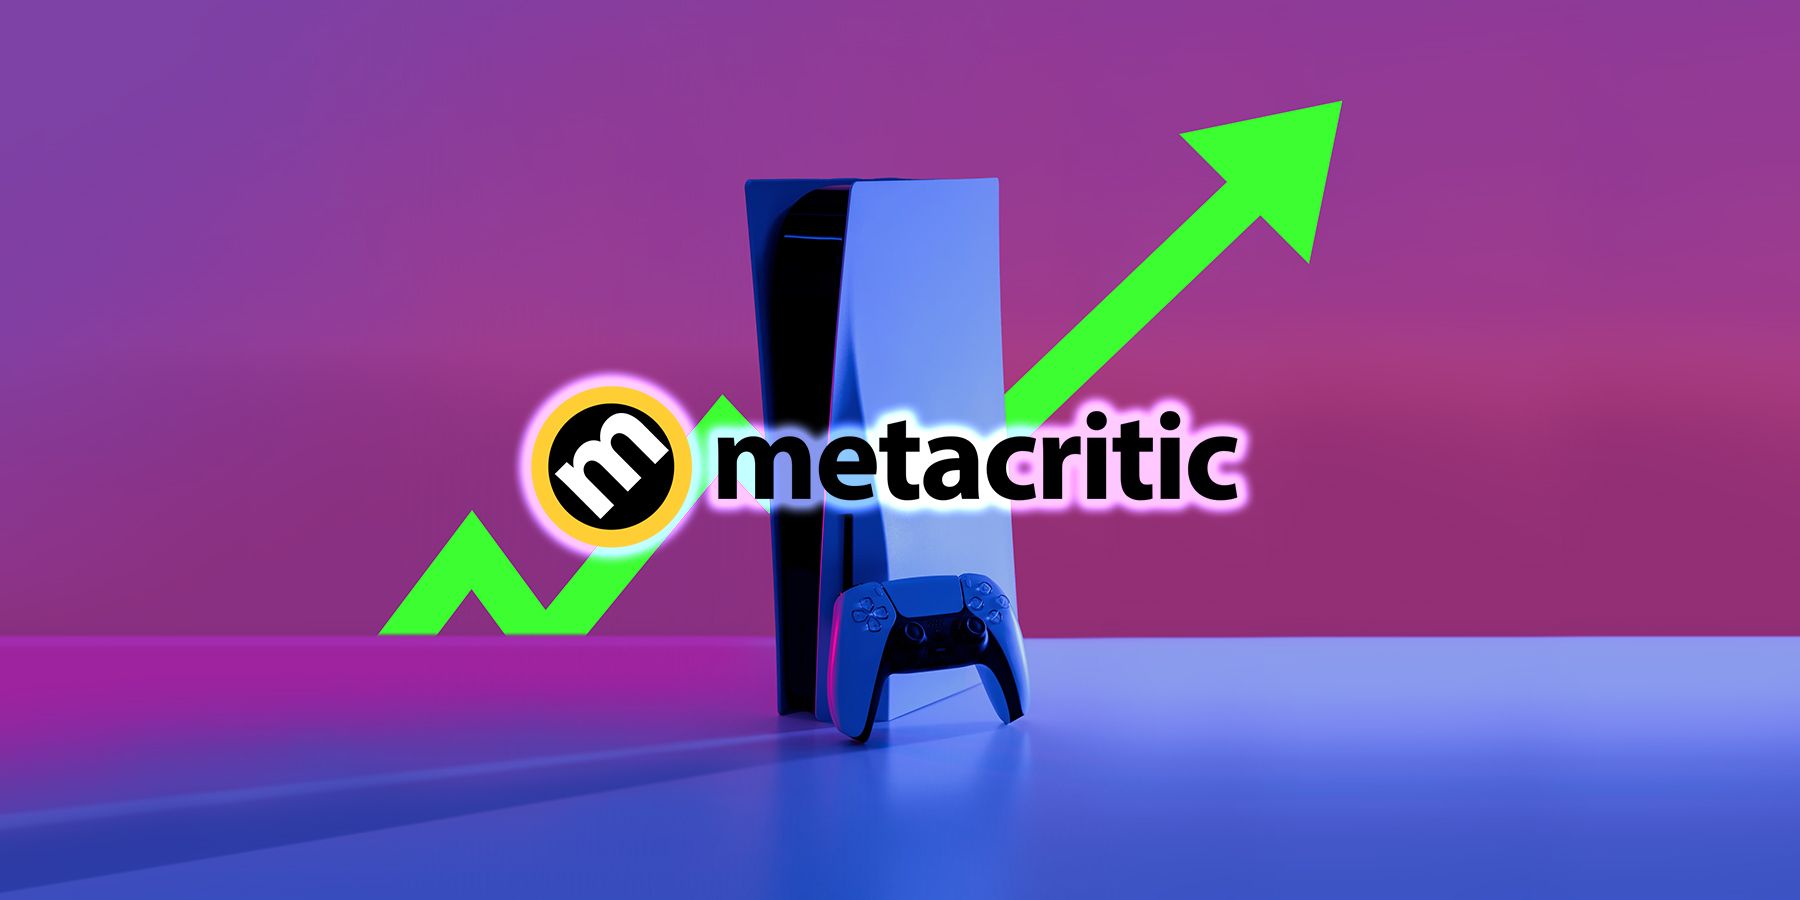 7 PlayStation 5 games with the highest Metacritic rating